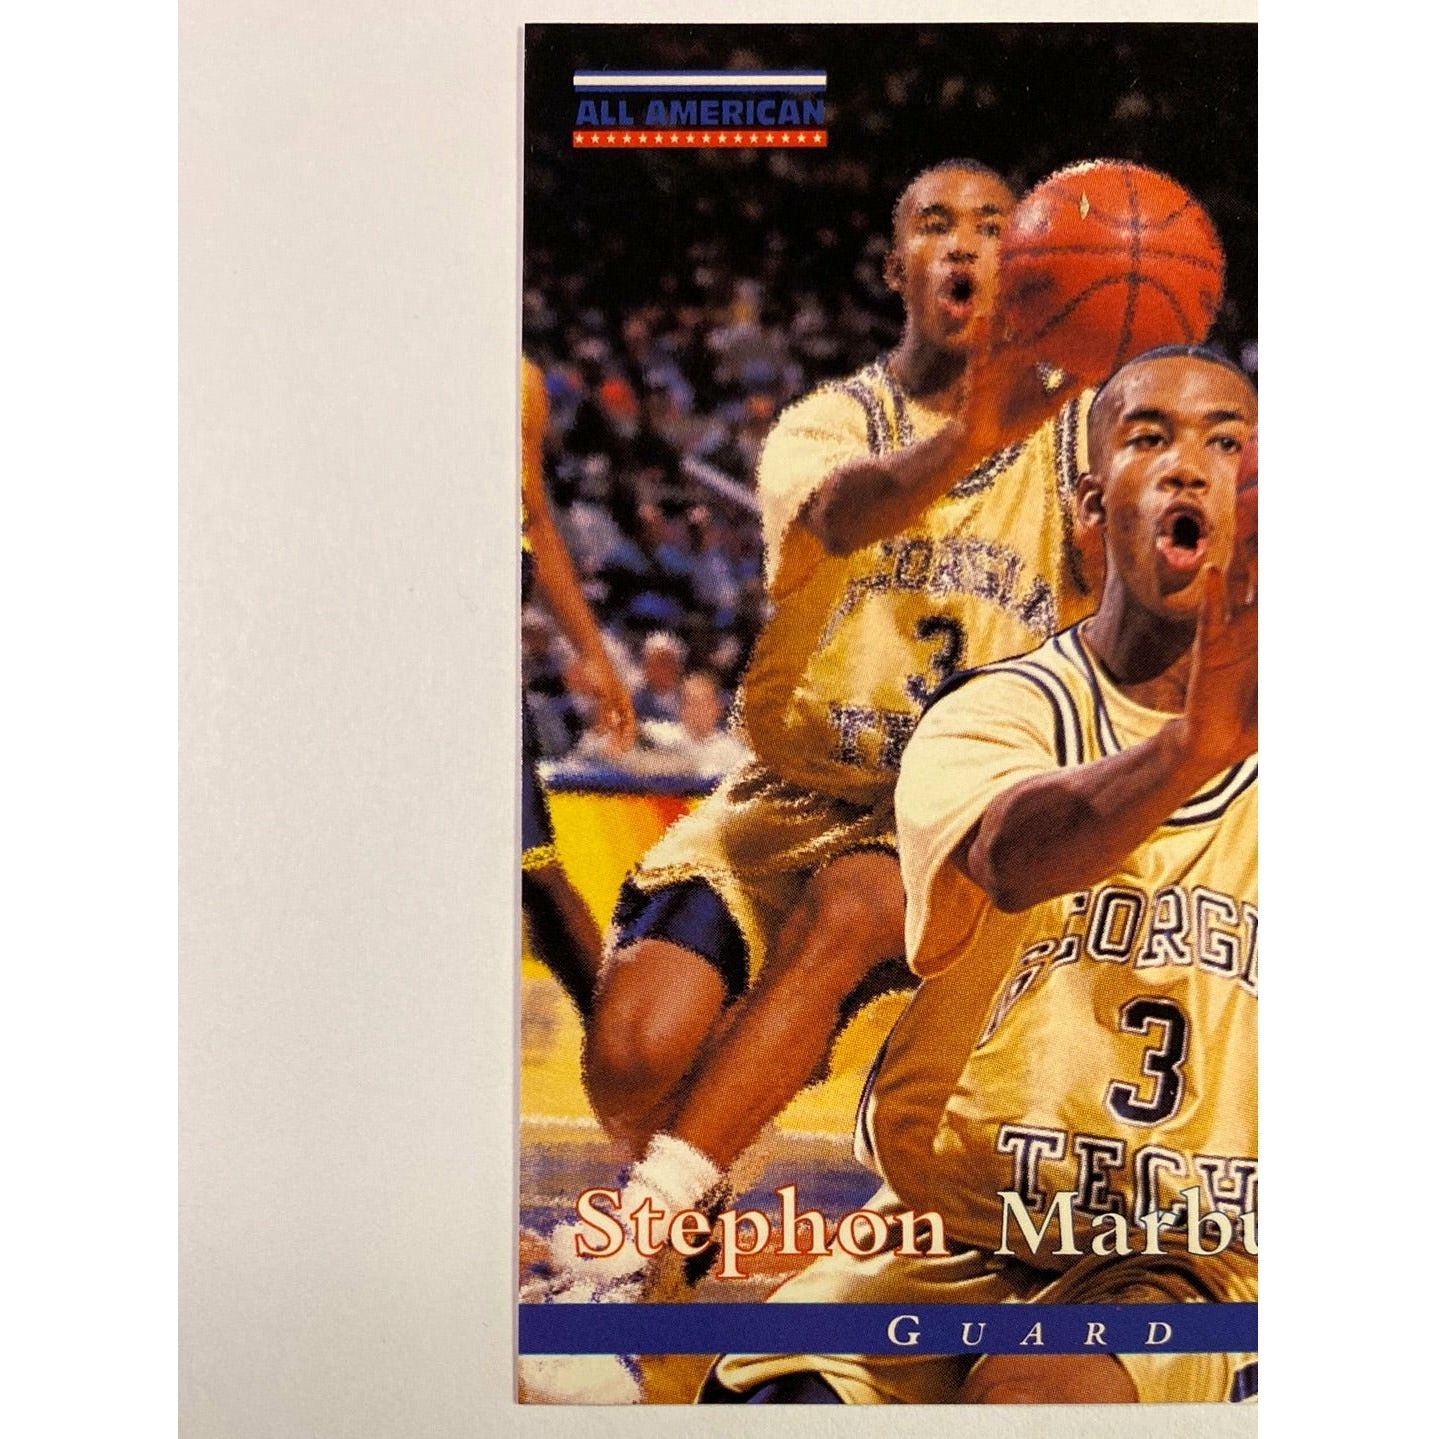  1996-97 Score Stephon Marbury All American RC  Local Legends Cards & Collectibles